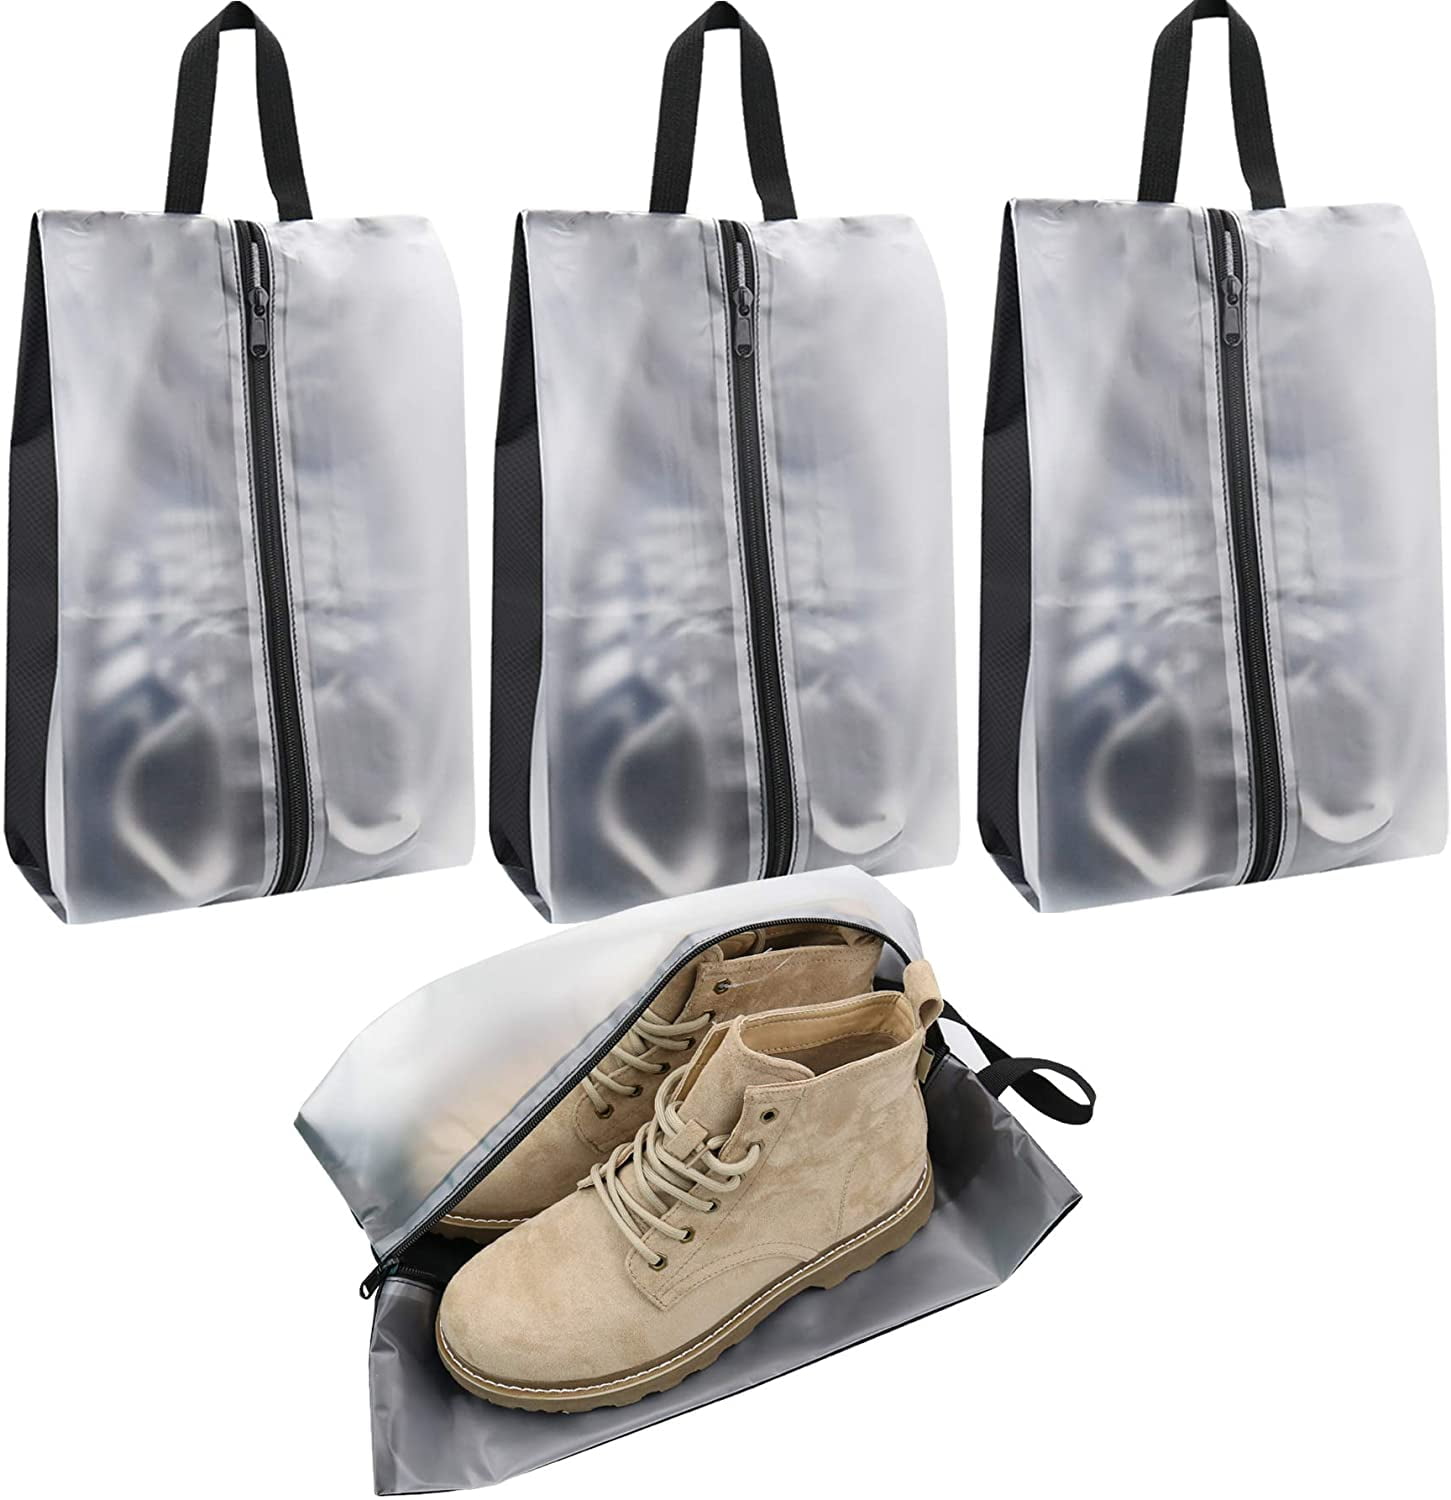 EKEES Clear Perforated Drawstring shoe bag for hanging organizing travel 4 Pack 